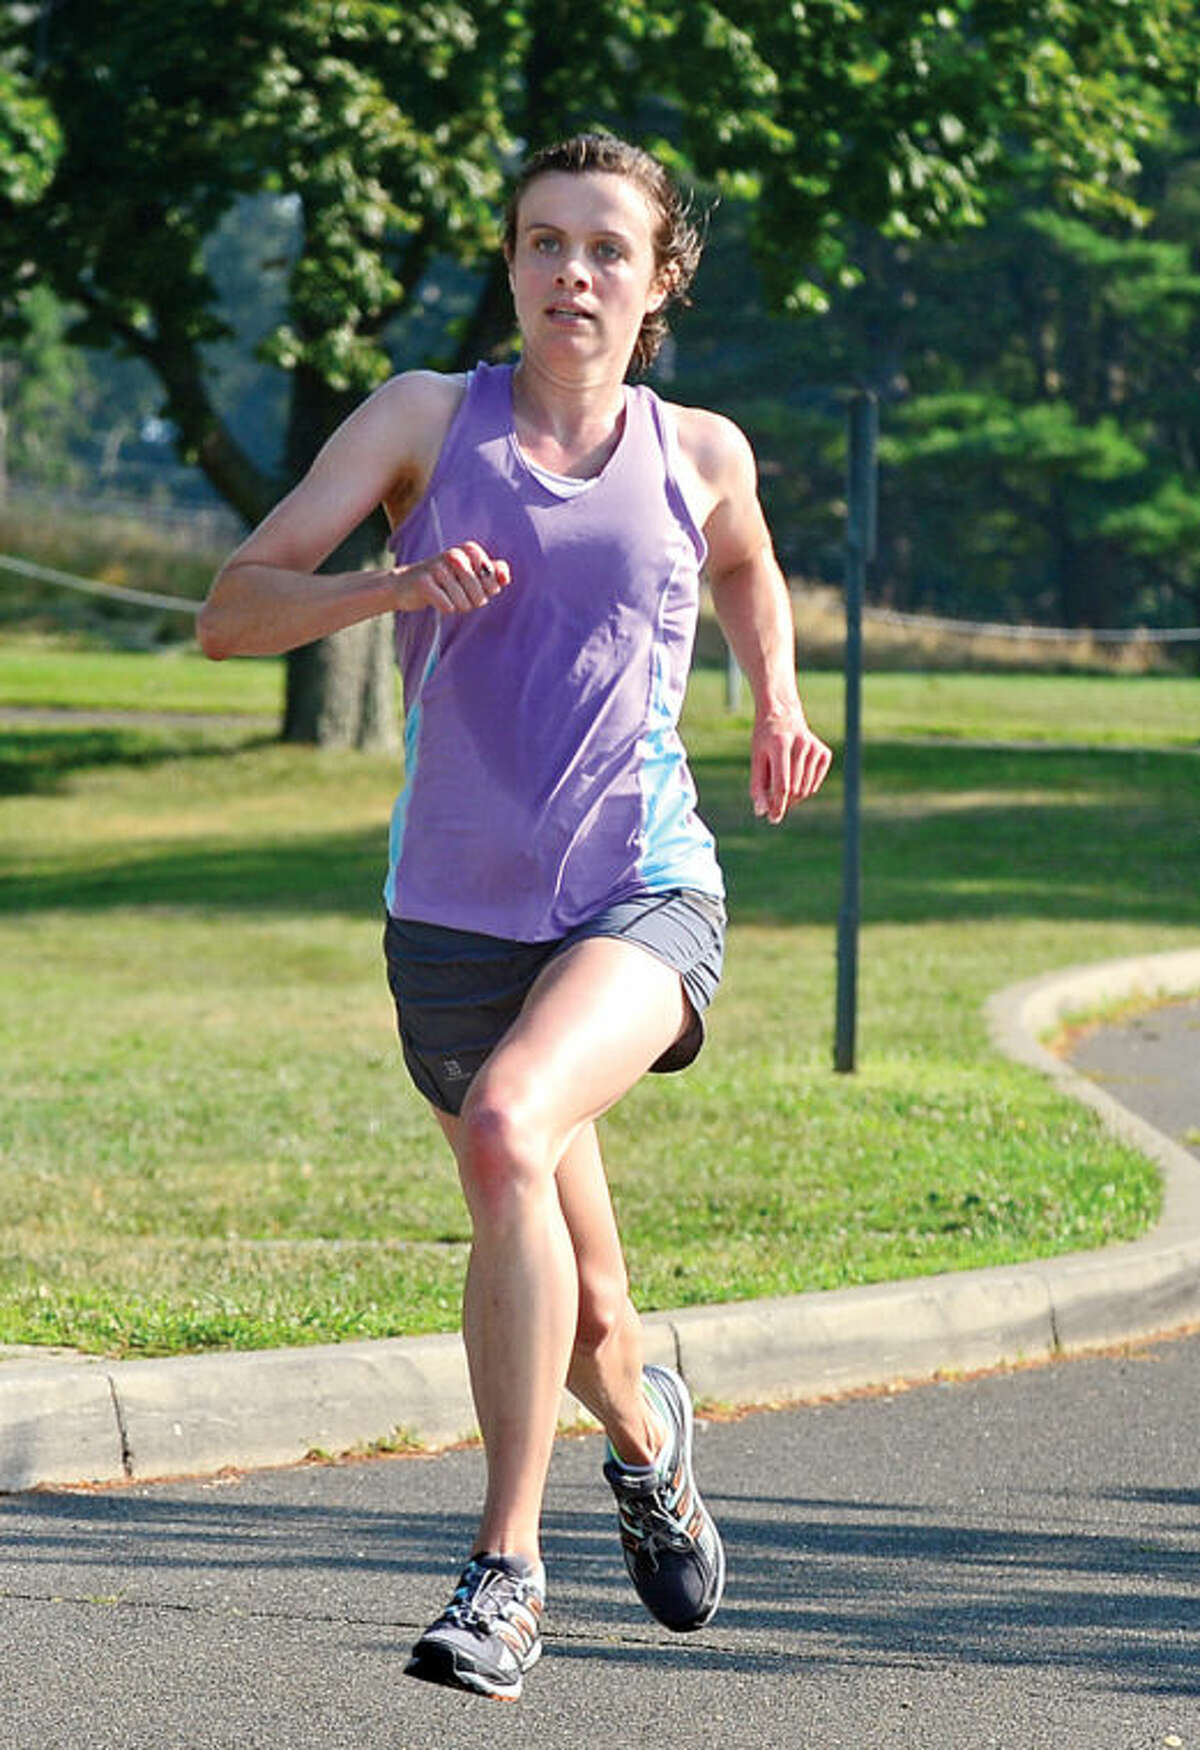 Hour photo / Erik Trautmann Kerry Lyons was the first woman finisher in the Westport Road Runners race no. 3, a 3.8 miler, at Longshore park Saturday.